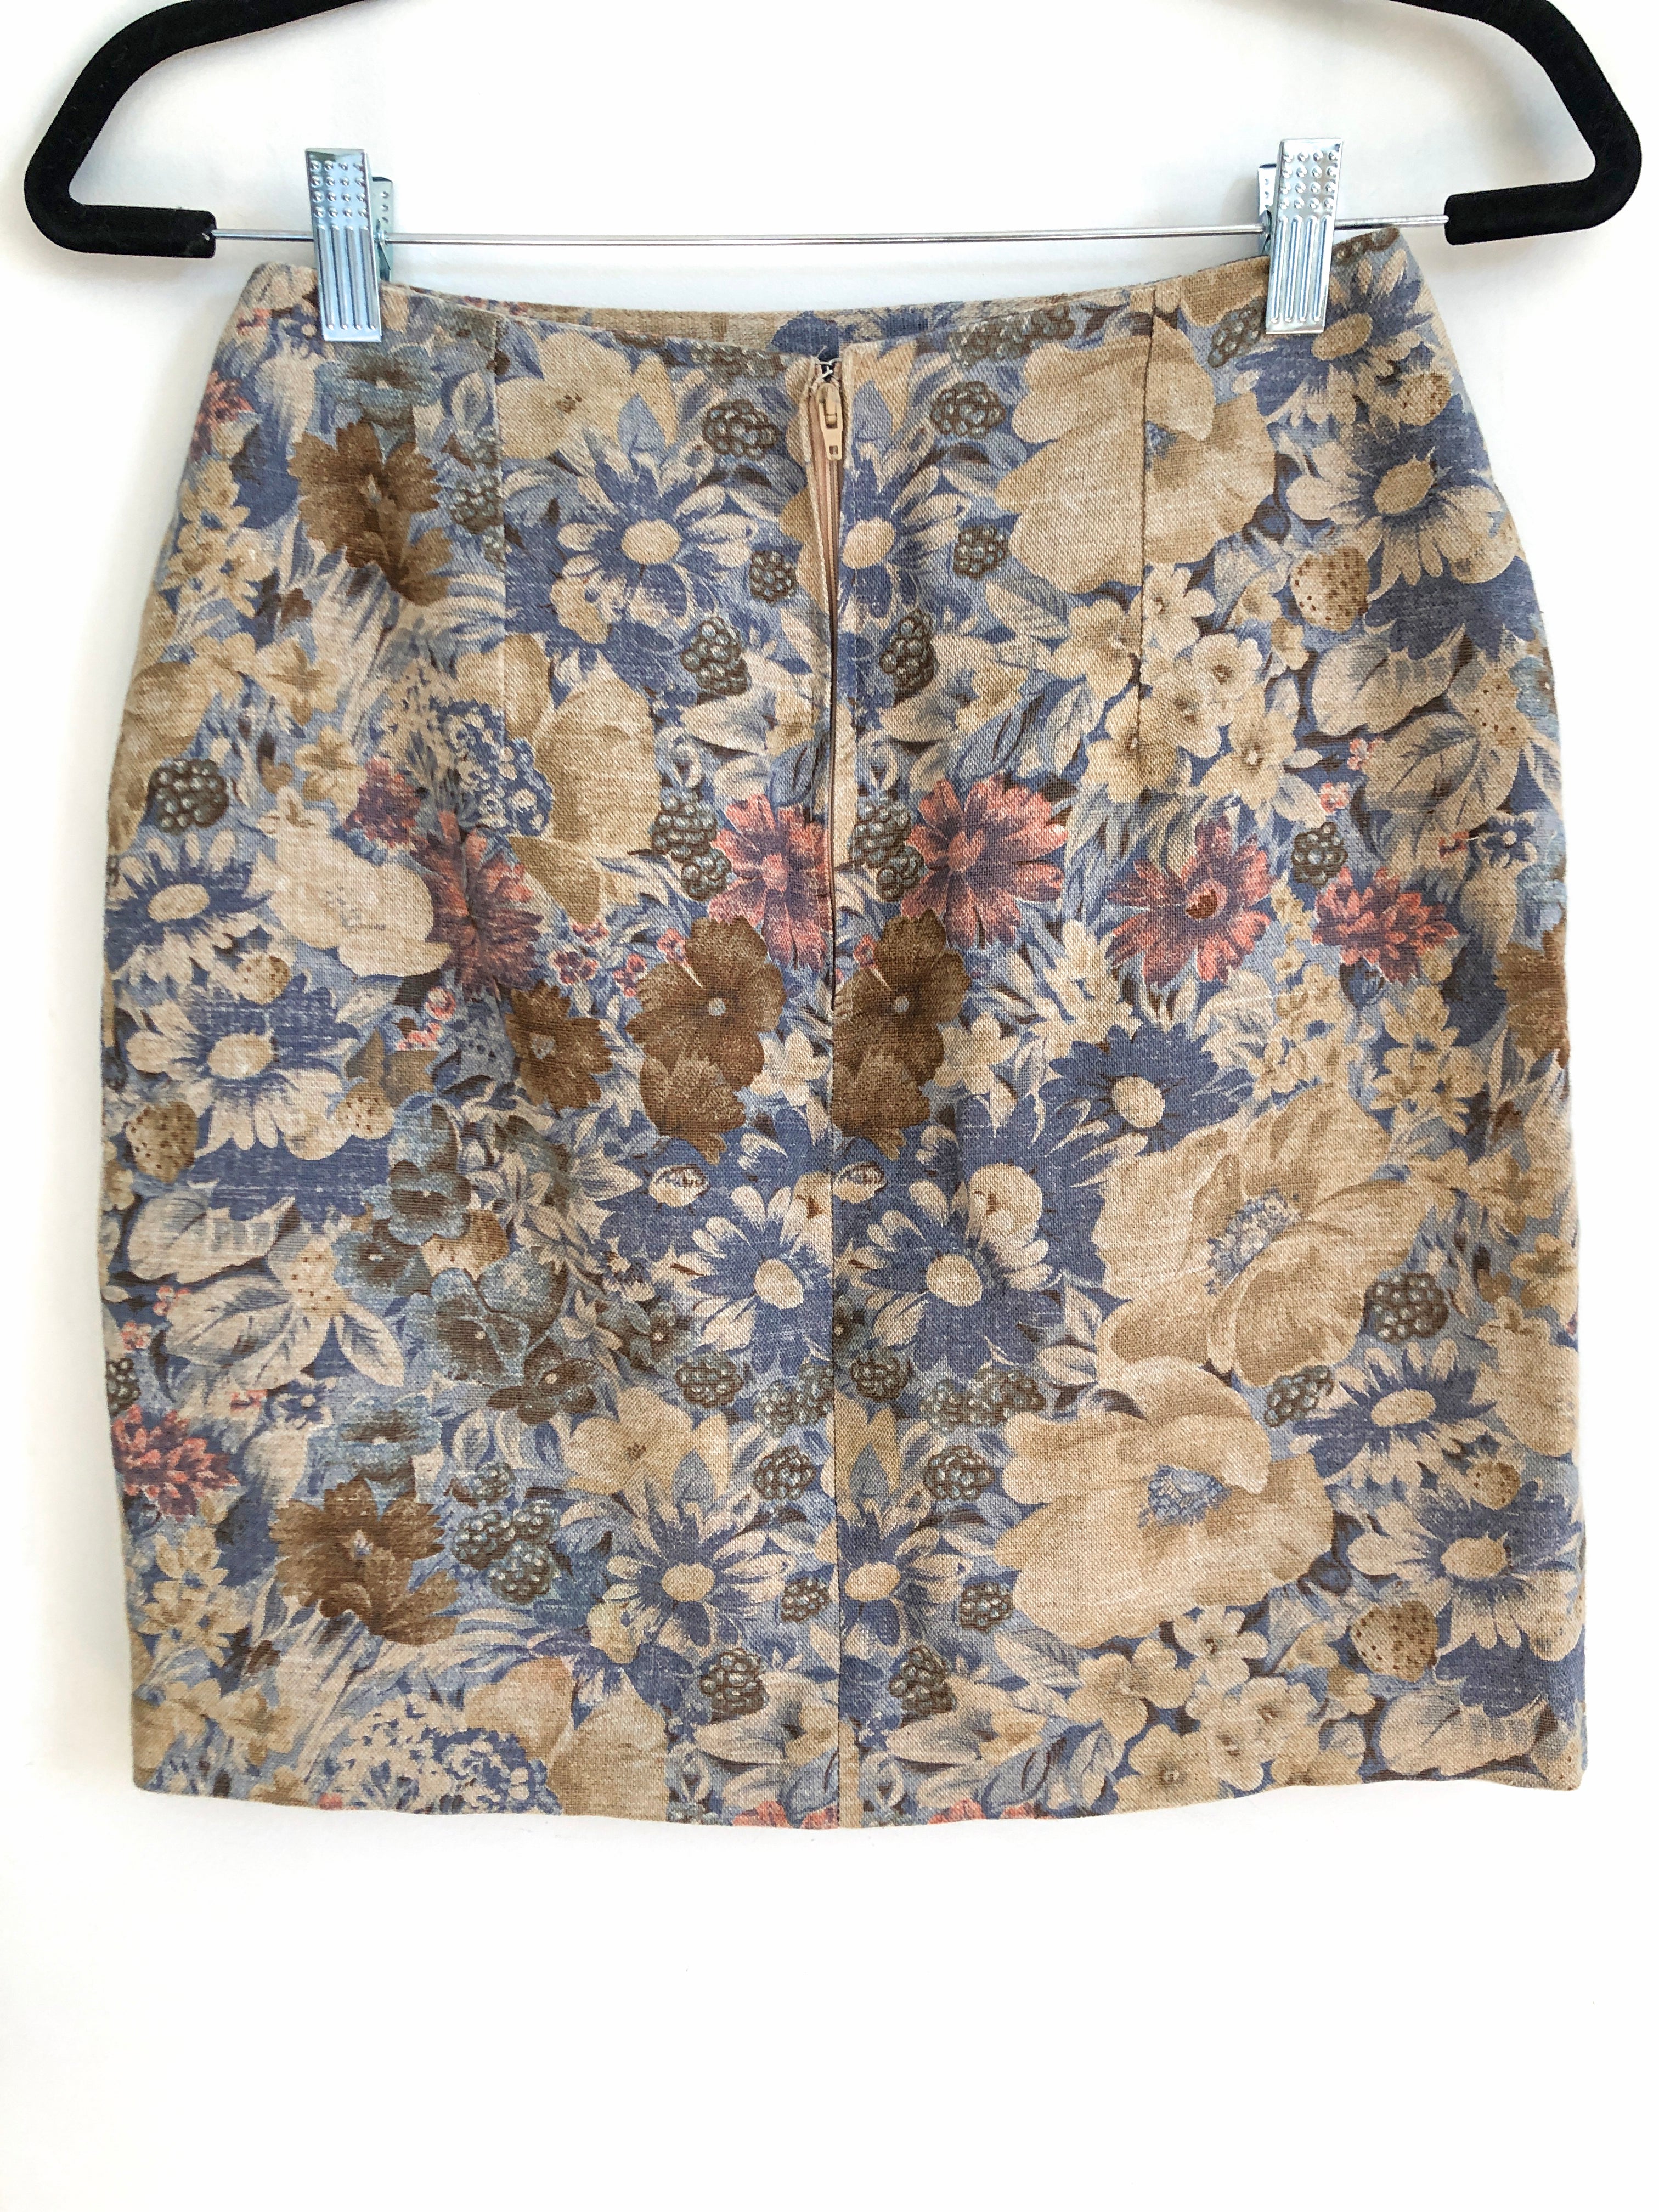 Vintage Linen Floral Mini Skirt, Made in Italy, 26 Inch Waist